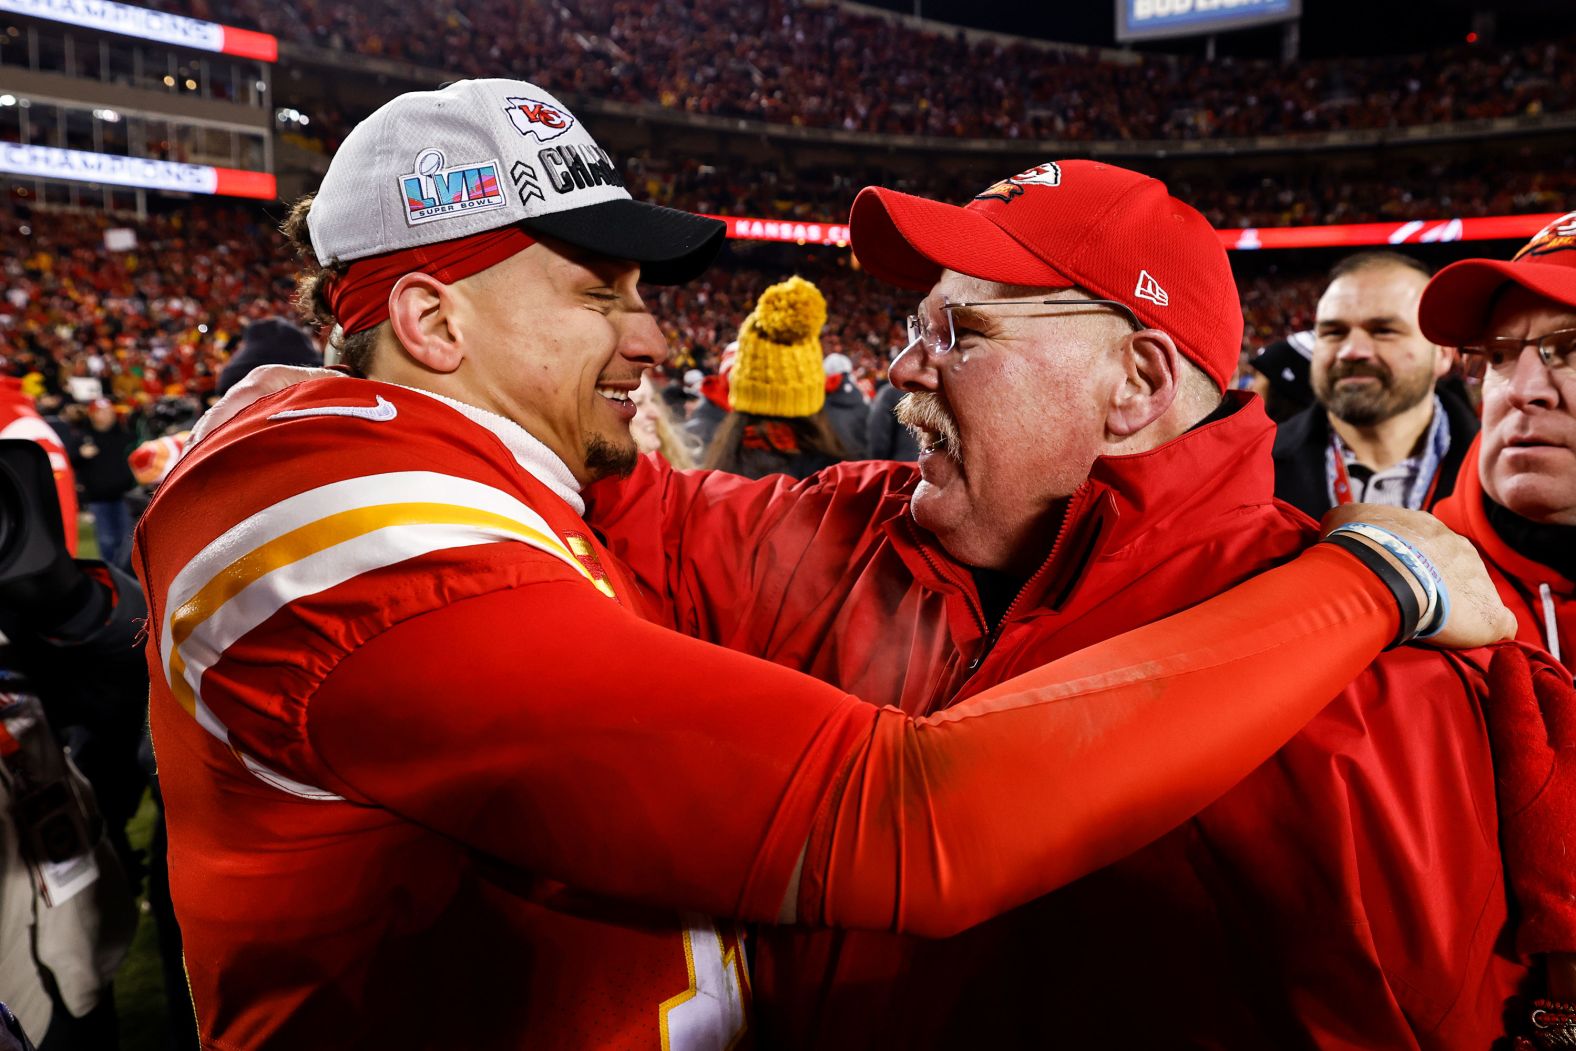 Kansas City Chiefs quarterback Patrick Mahomes celebrates with Chiefs head coach Andy Reid after they won the AFC Championship on Sunday, January 29, <a href="index.php?page=&url=https%3A%2F%2Fwww.cnn.com%2F2023%2F01%2F29%2Fus%2Fnfl-conference-championships-chiefs-bengals-eagles-49ers%2Findex.html" target="_blank">and clinched a spot in the Super Bowl</a>. This will be the Chiefs' third Super Bowl appearance in four years.